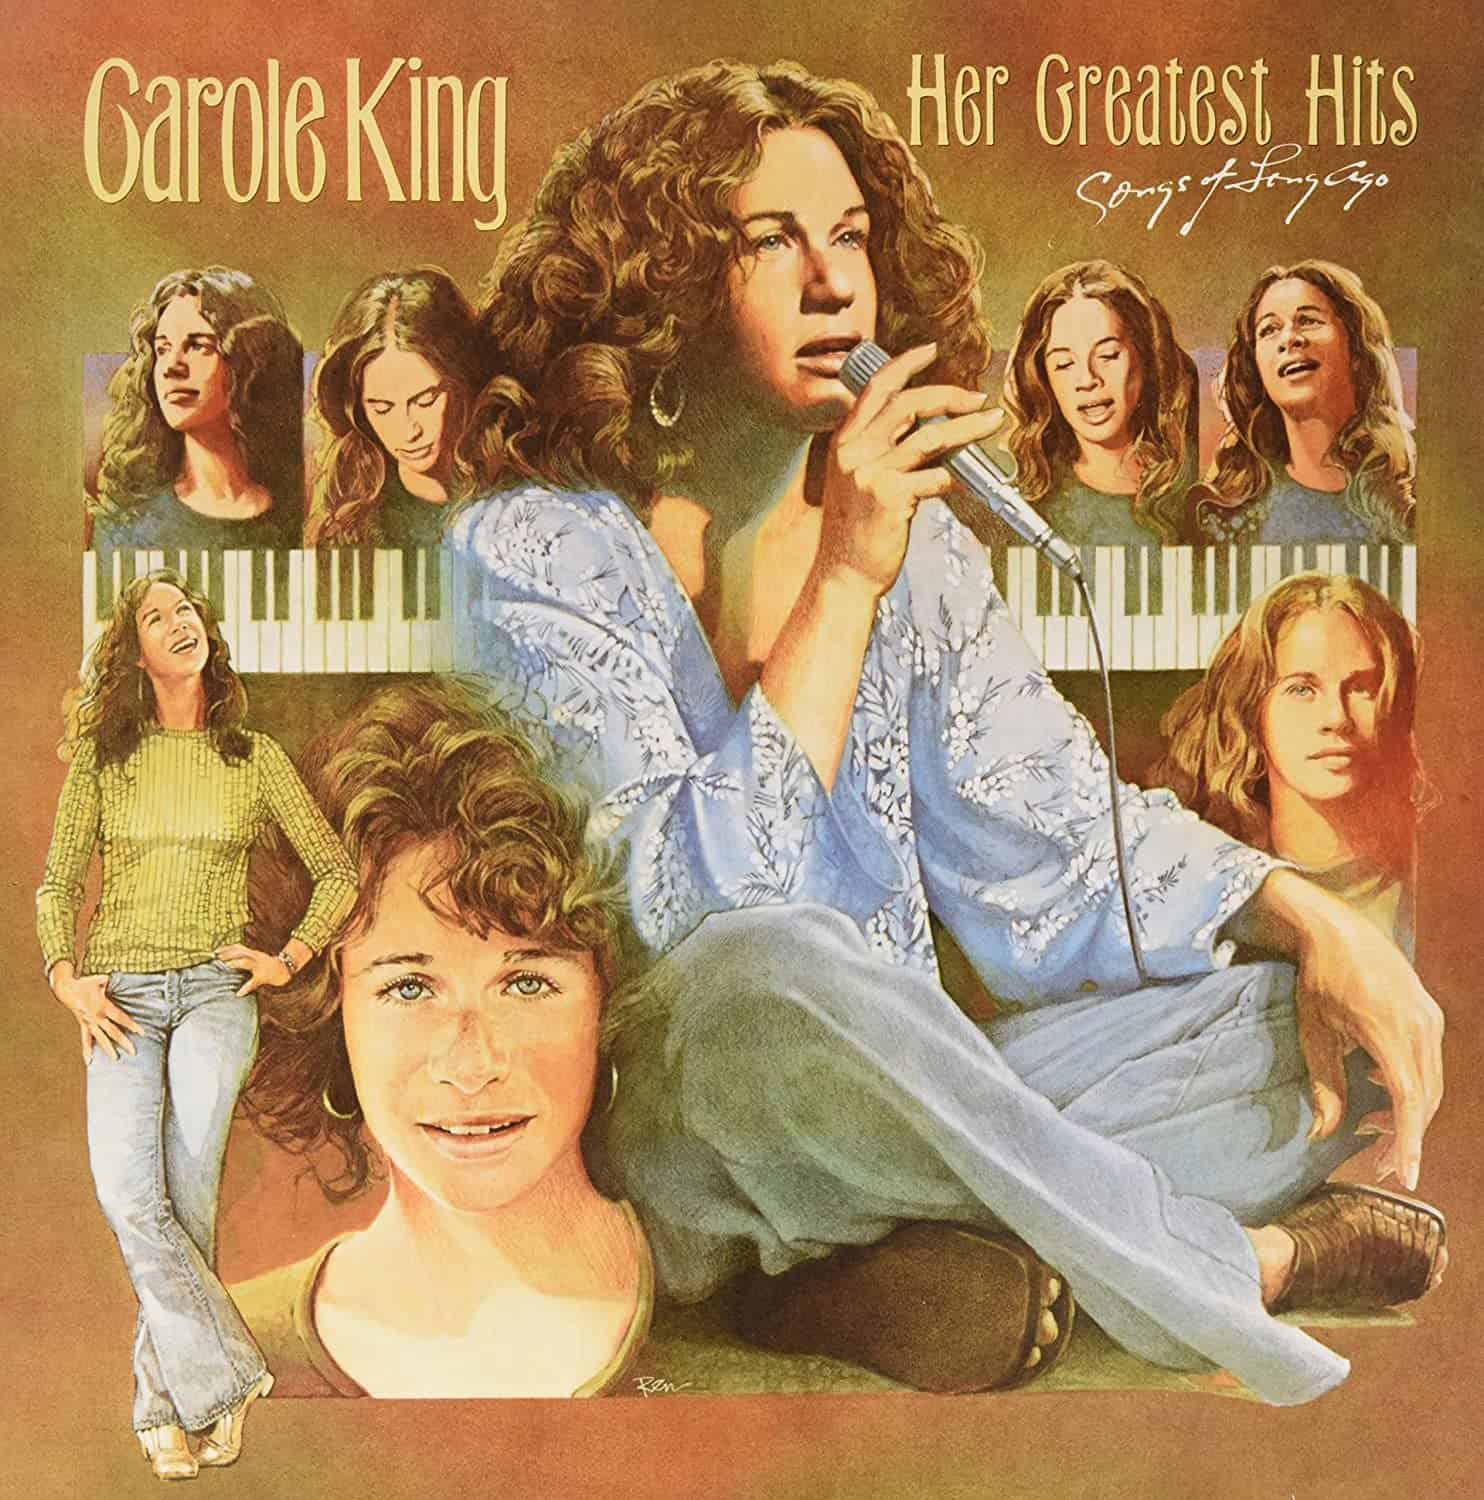 Carole-King-Her-Greatest-Hits-Songs-of-Long-Ago-vinyl-record-album1